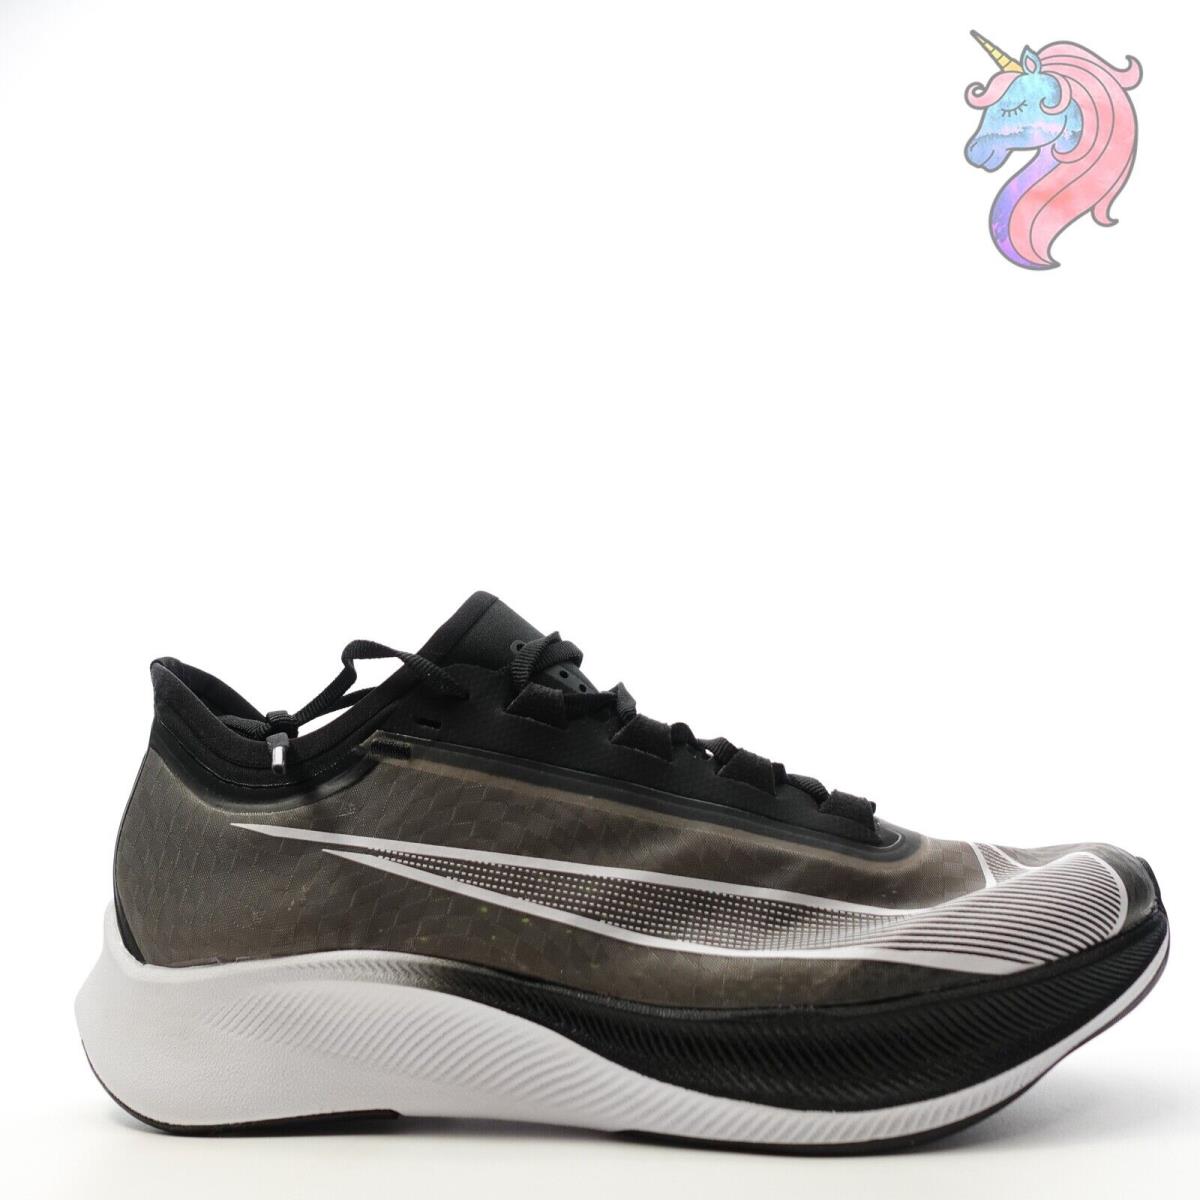 Nike Zoom Fly 3 Running Shoes Black White AT8240-007 Mens Size 8